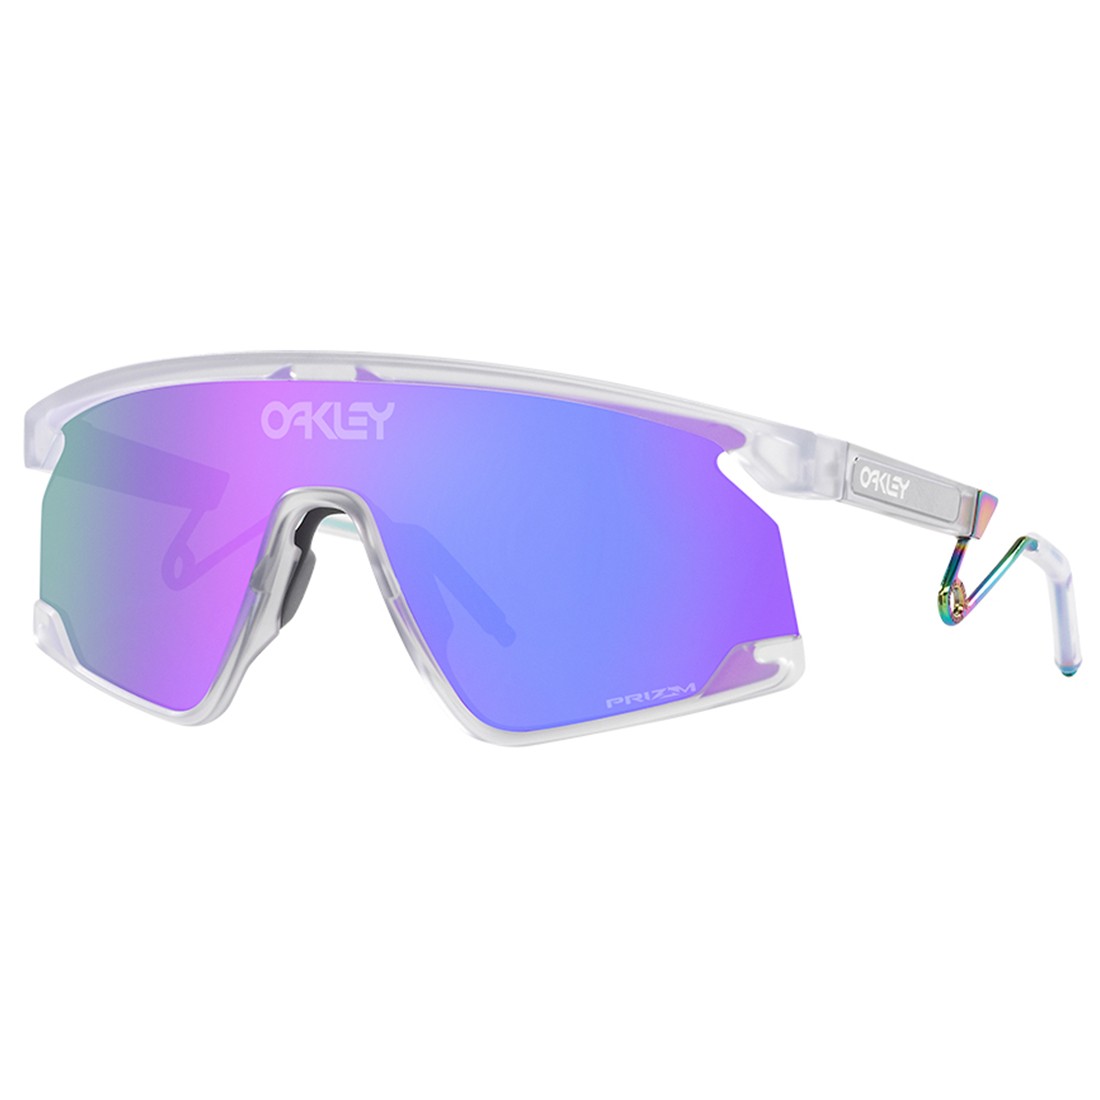 Oakley BXGTR Metai Brushed sunglasses (clear / prizm violet)